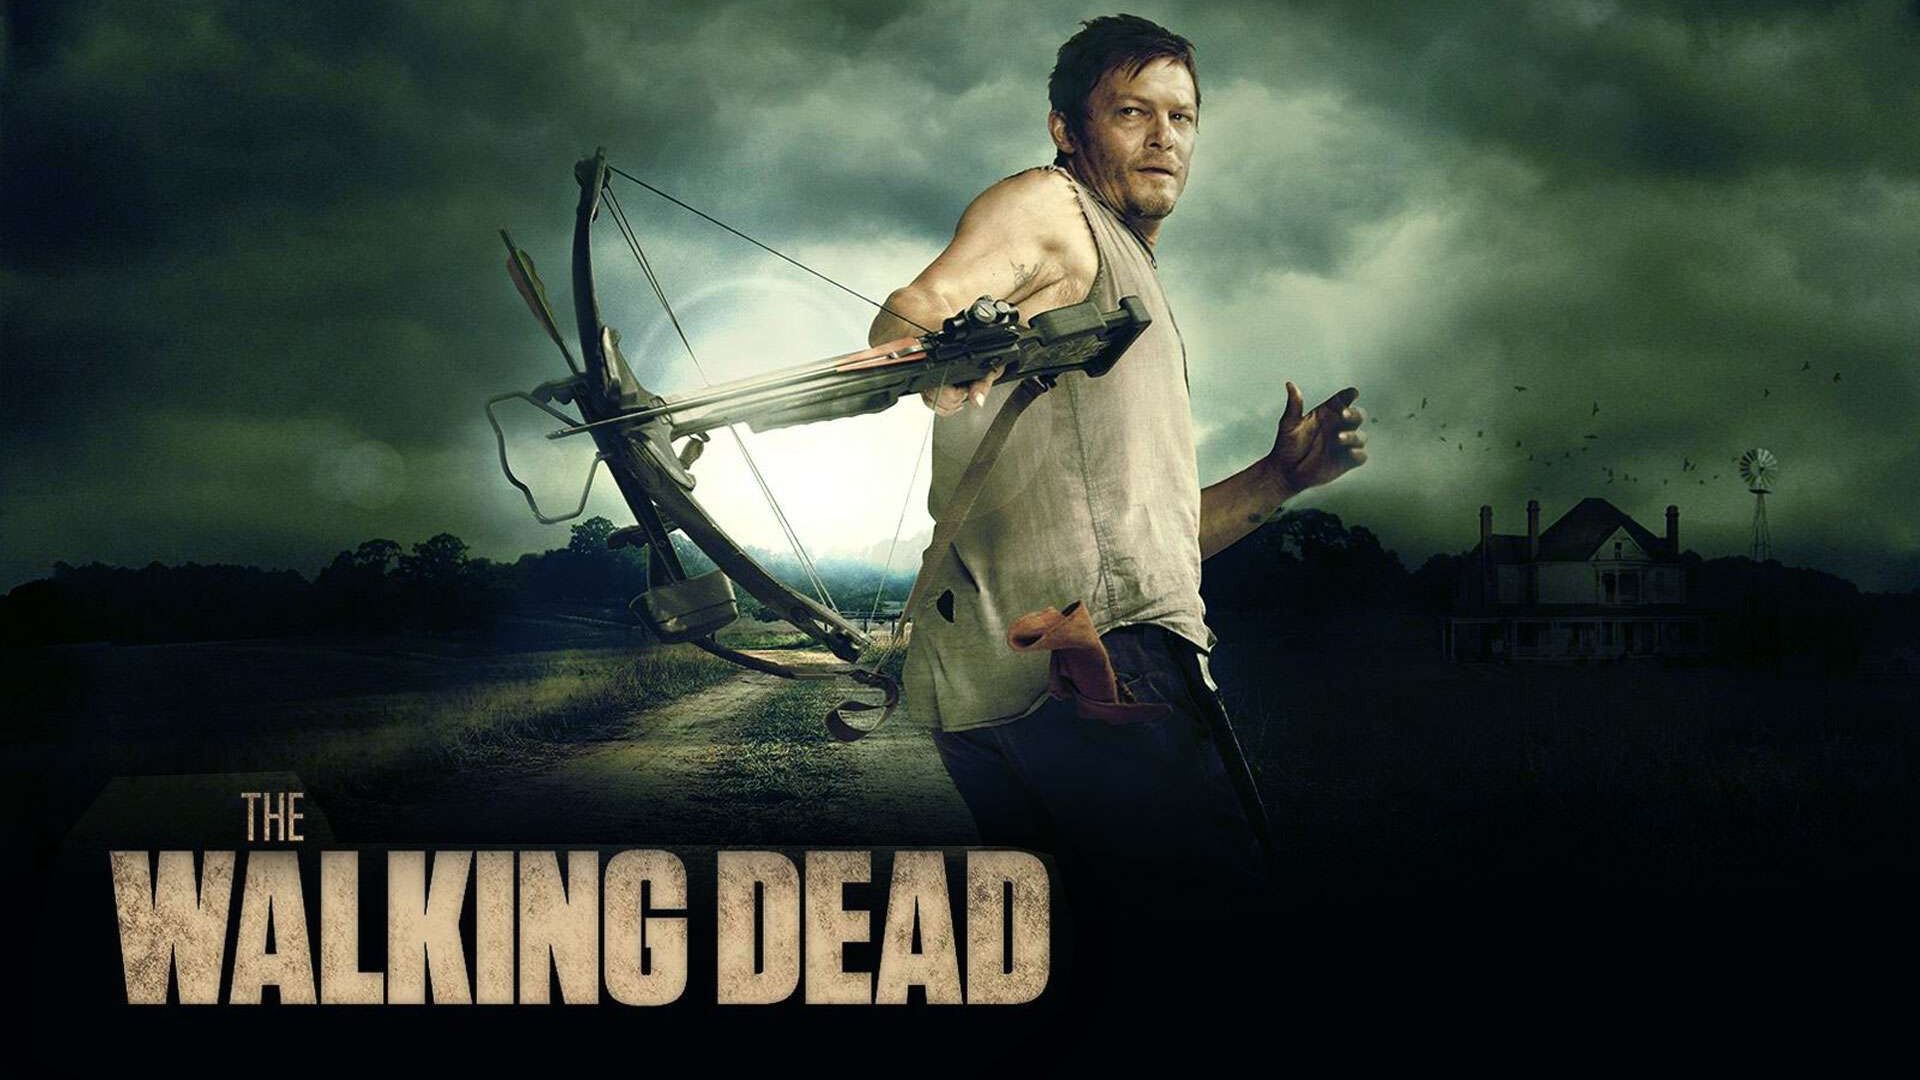 The Walking Dead Backgrounds | Wallpapers, Backgrounds, Images ...